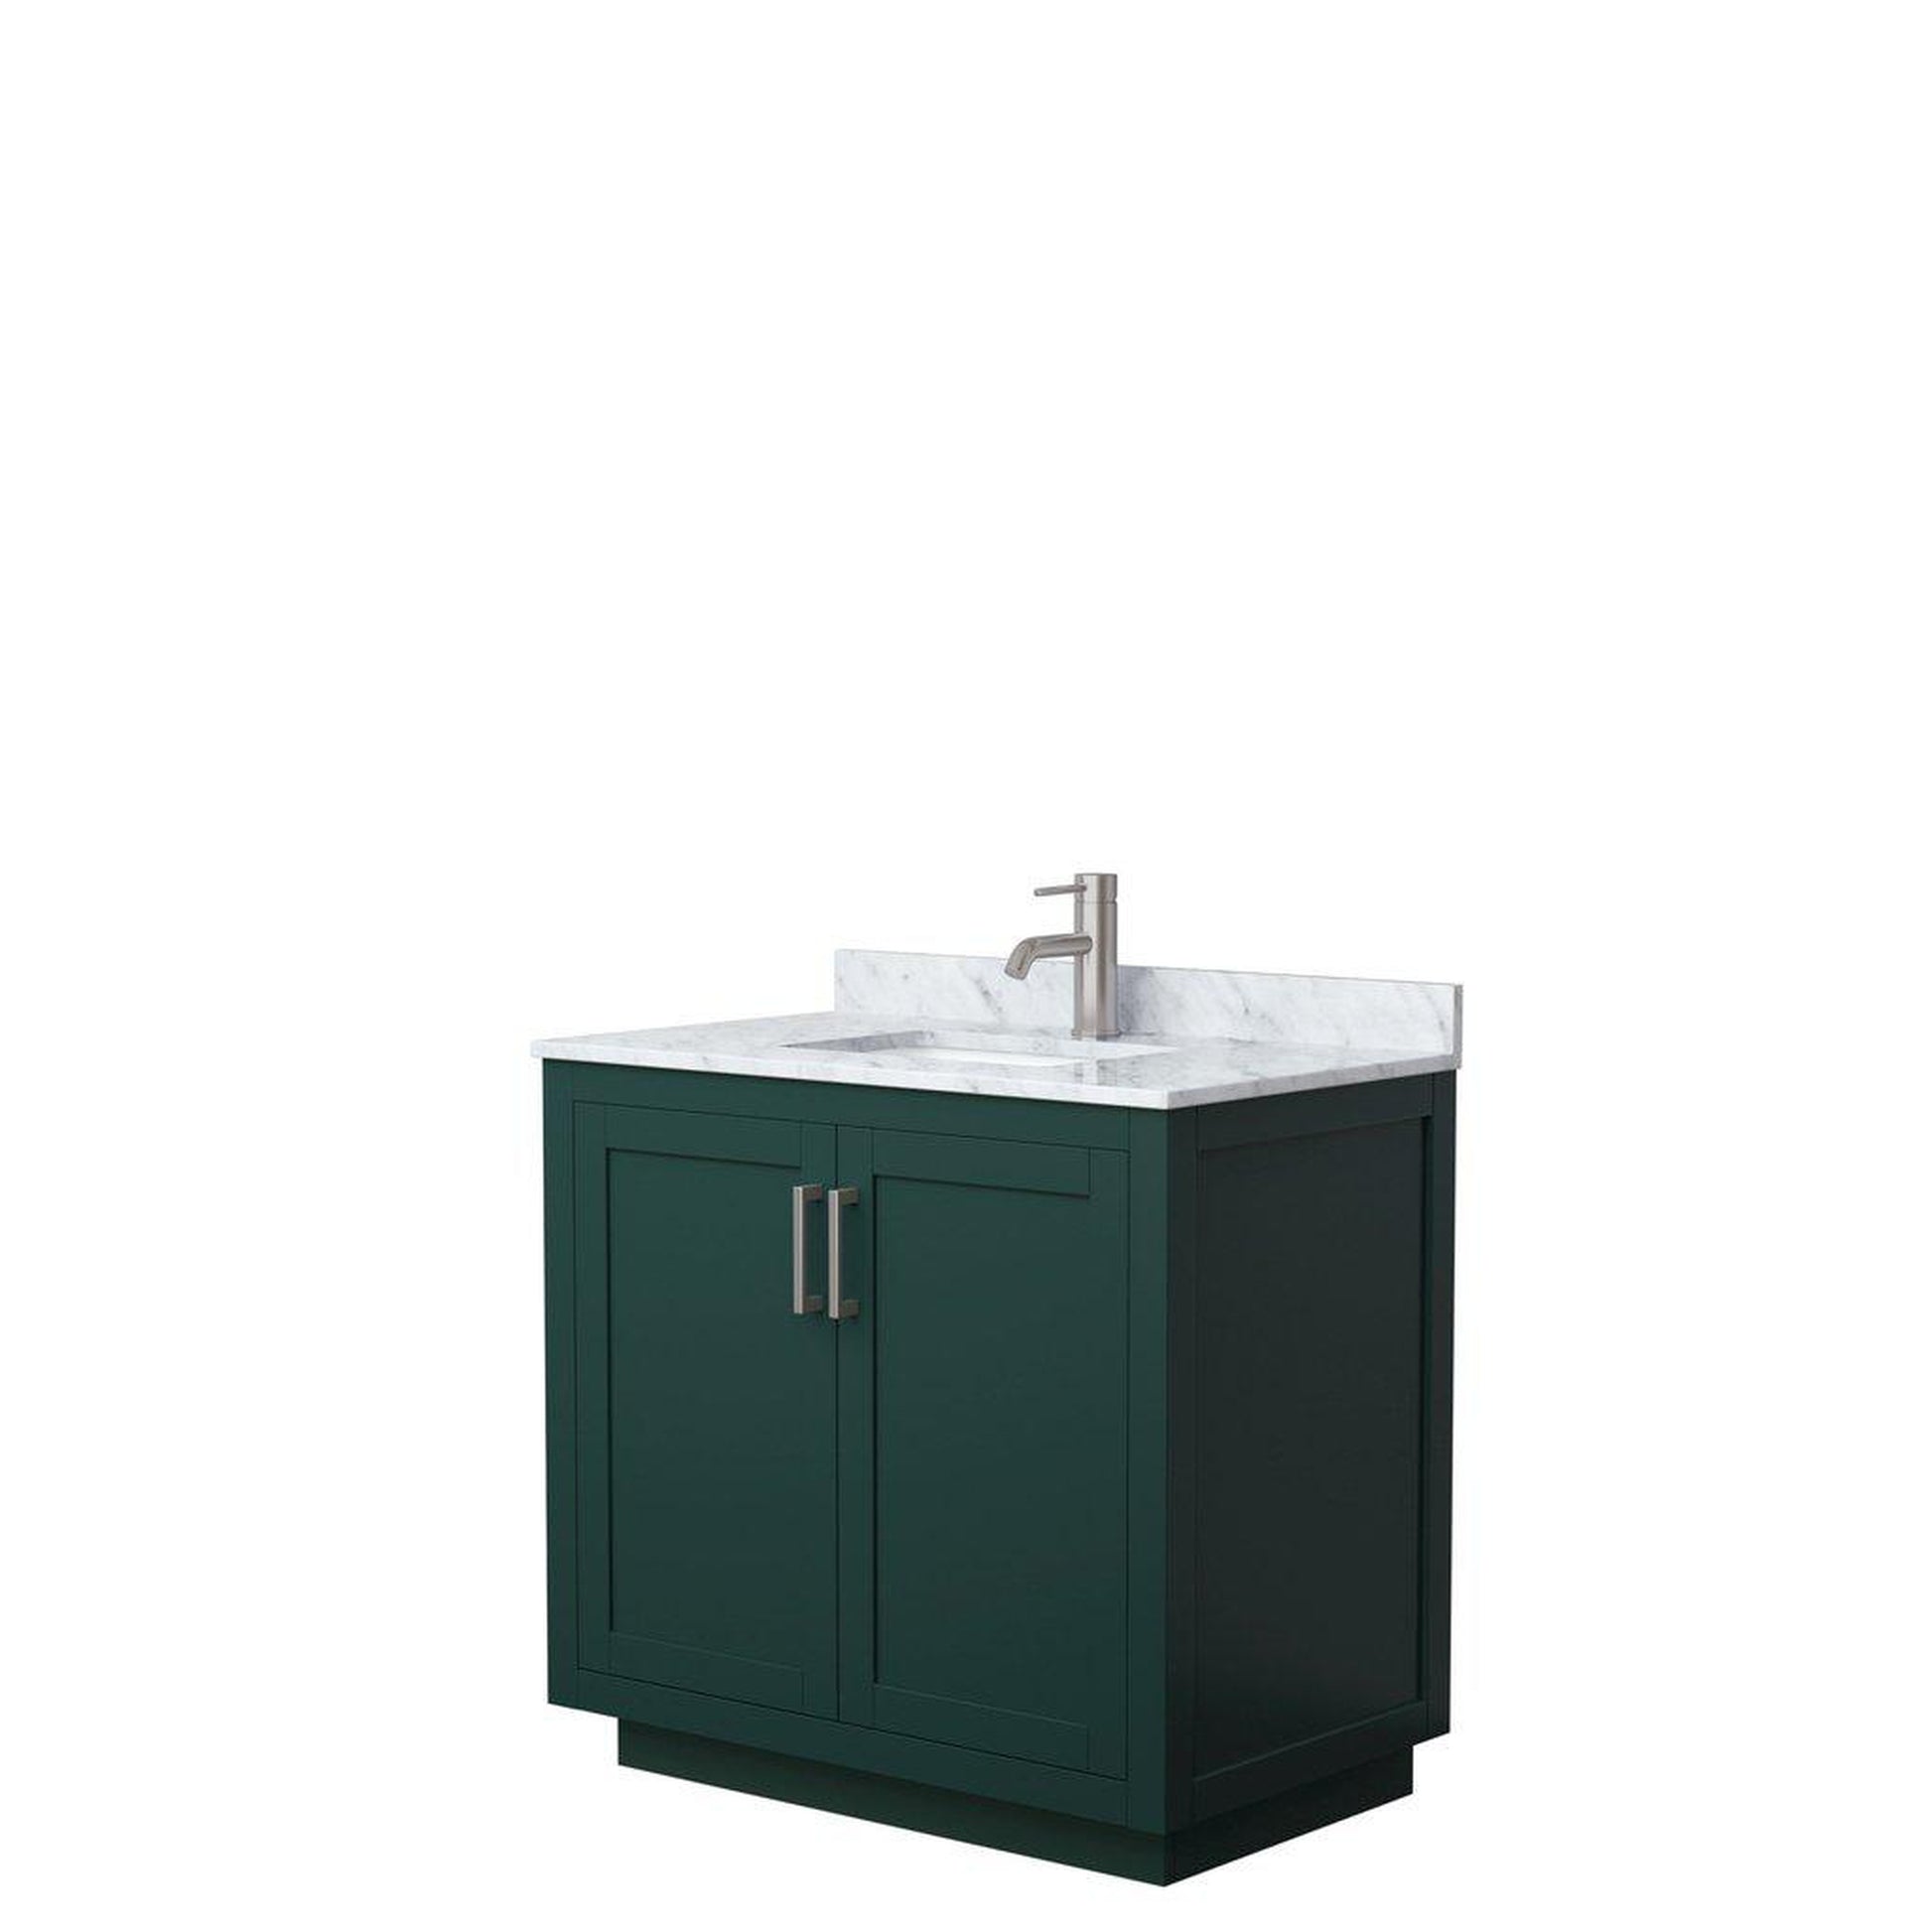 Wyndham Collection Miranda 36" Single Bathroom Green Vanity Set With White Carrara Marble Countertop, Undermount Square Sink, And Brushed Nickel Trim